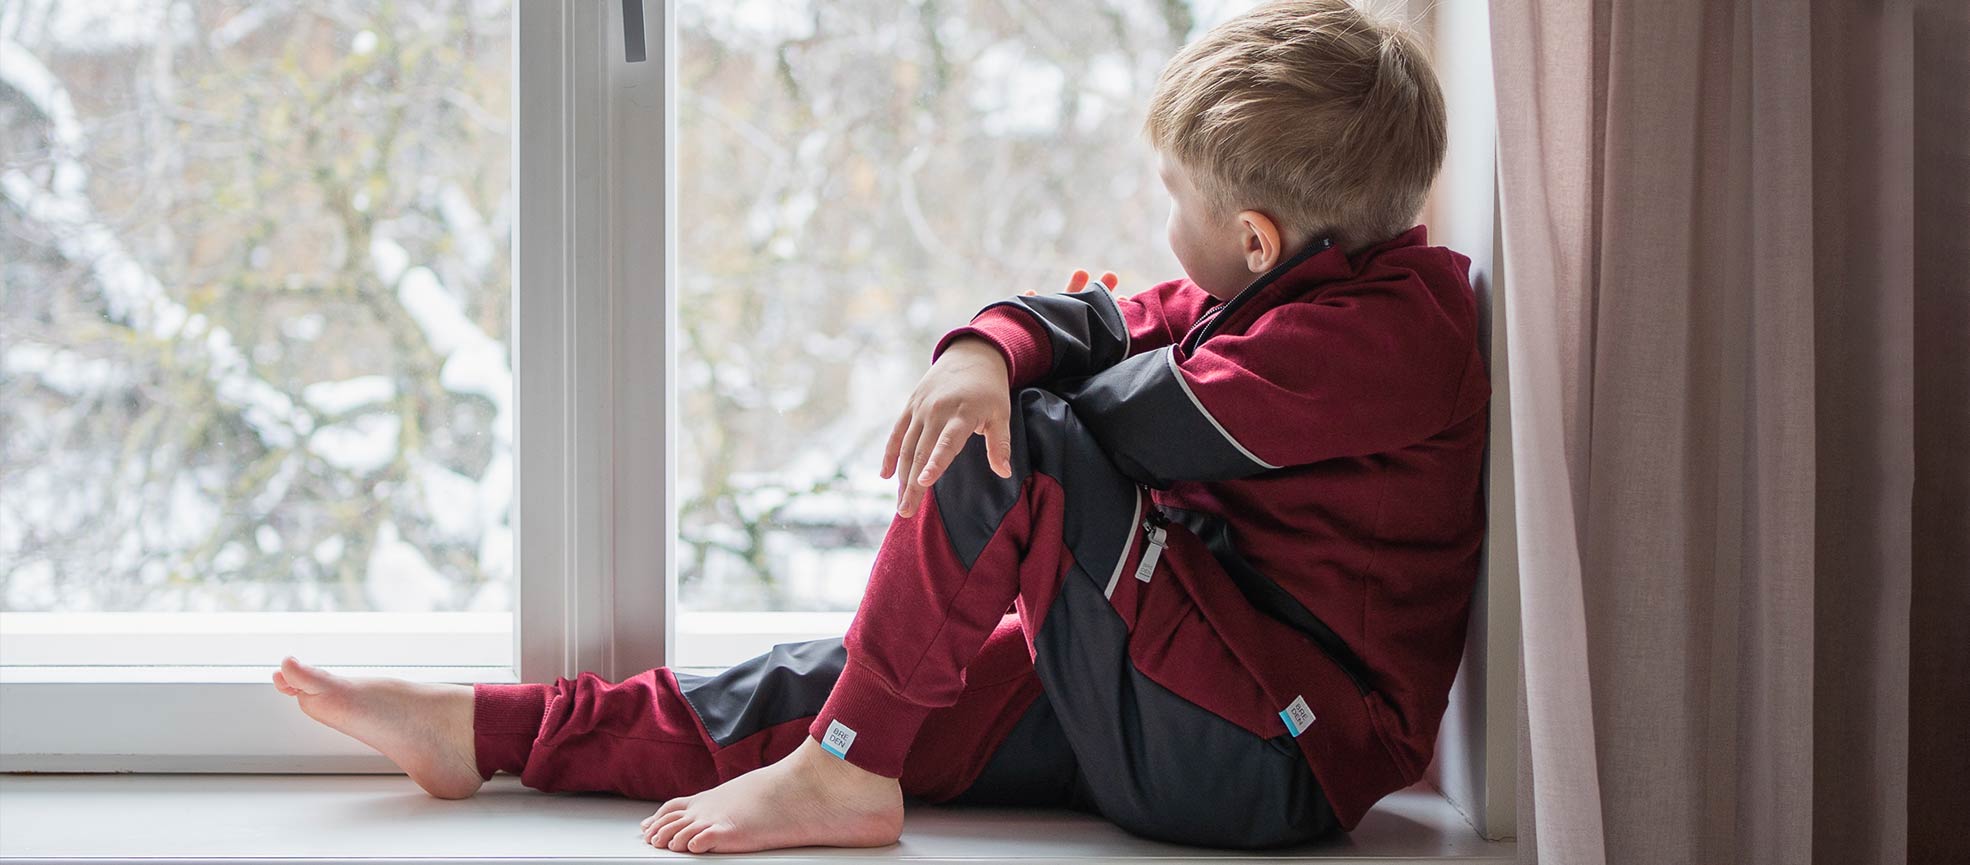 kid looking out of the window dreaming in organic cotton outdoor sweats